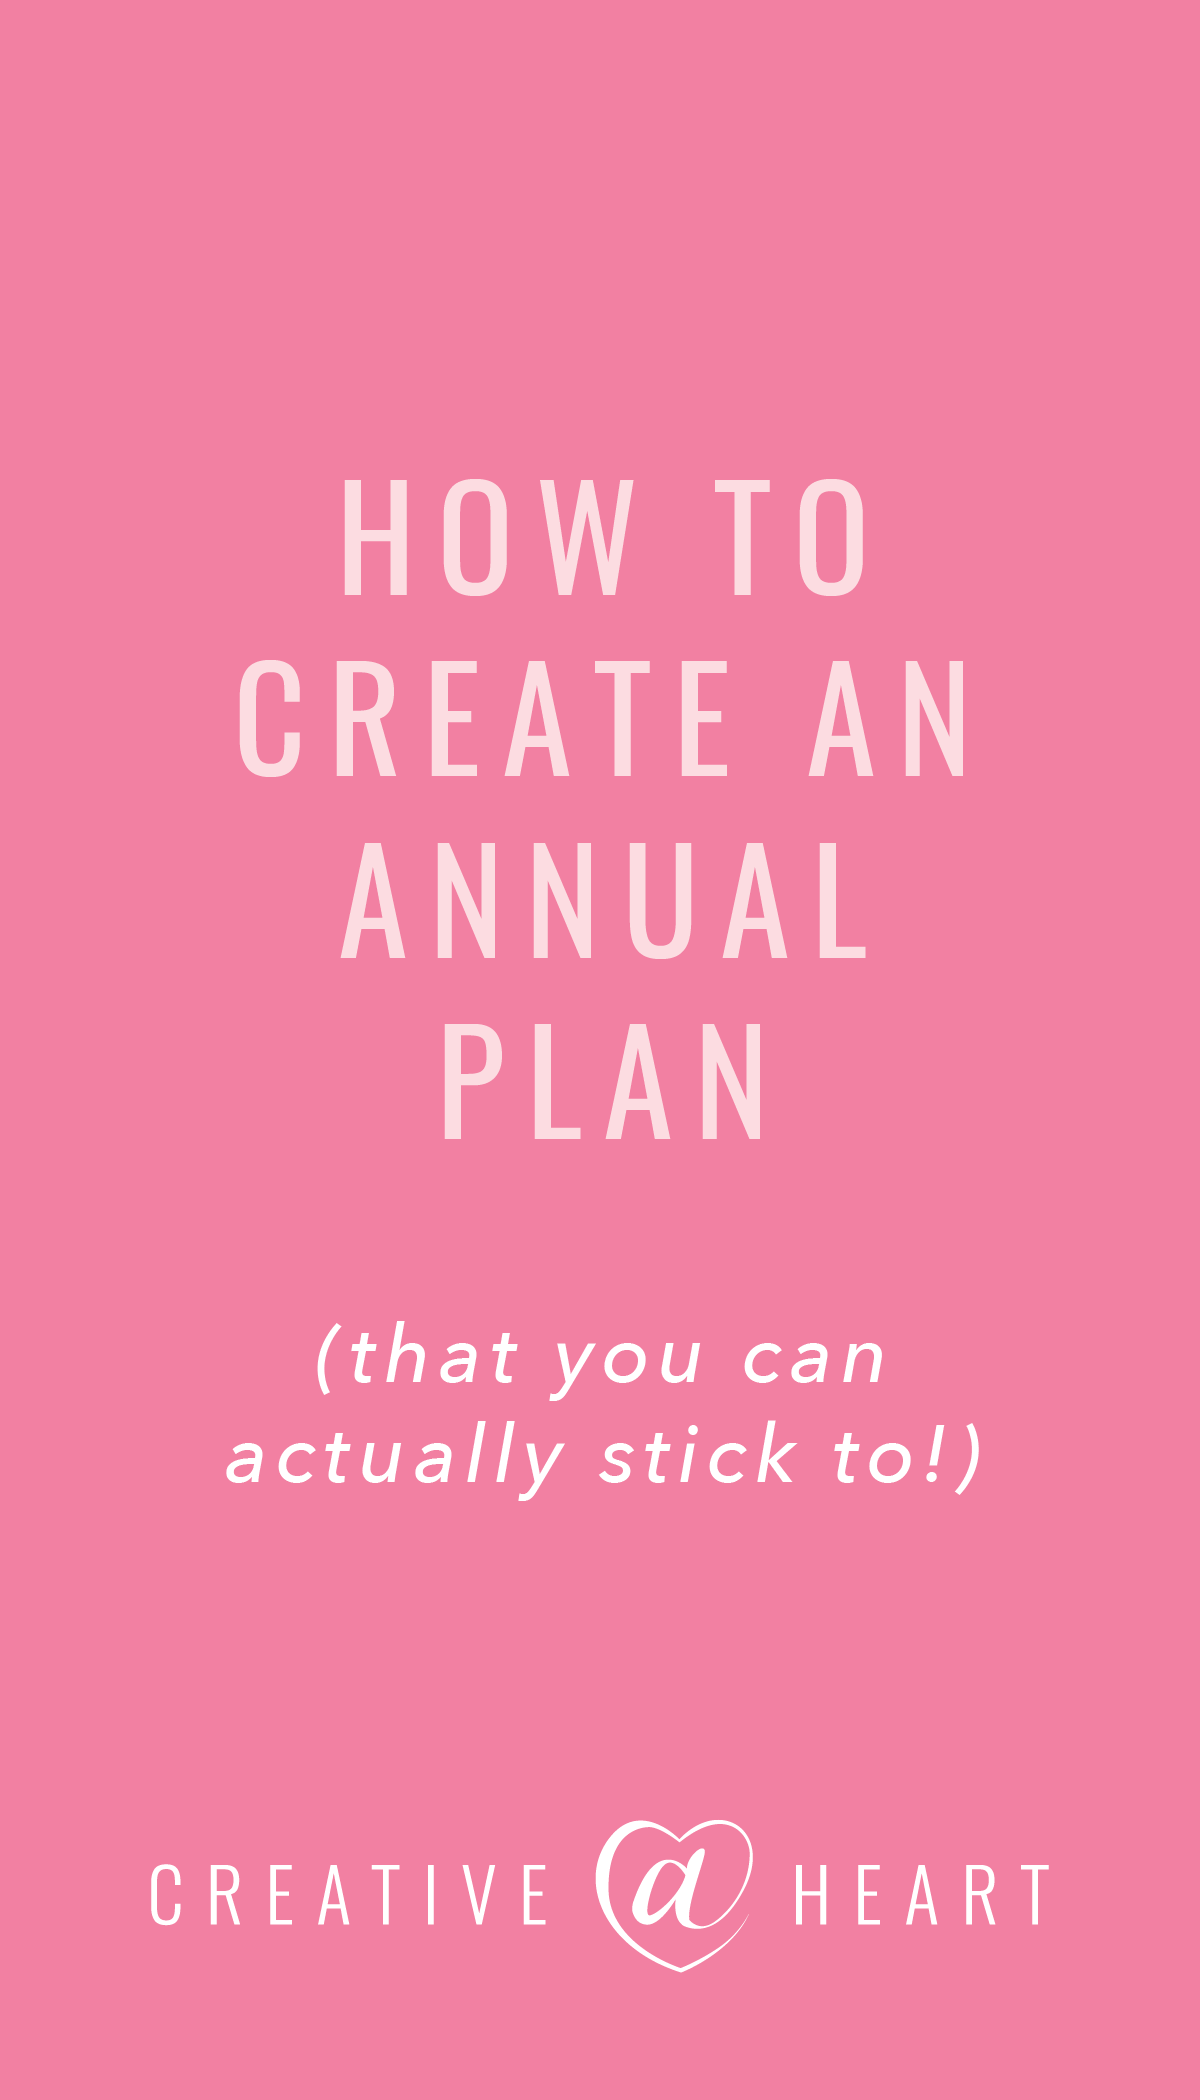 How to Create a 2021 Annual Plan (that you can actually stick to!) // Creative at Heart #quarterlyplanning #endofyear #printablecalendar #2020 #2021